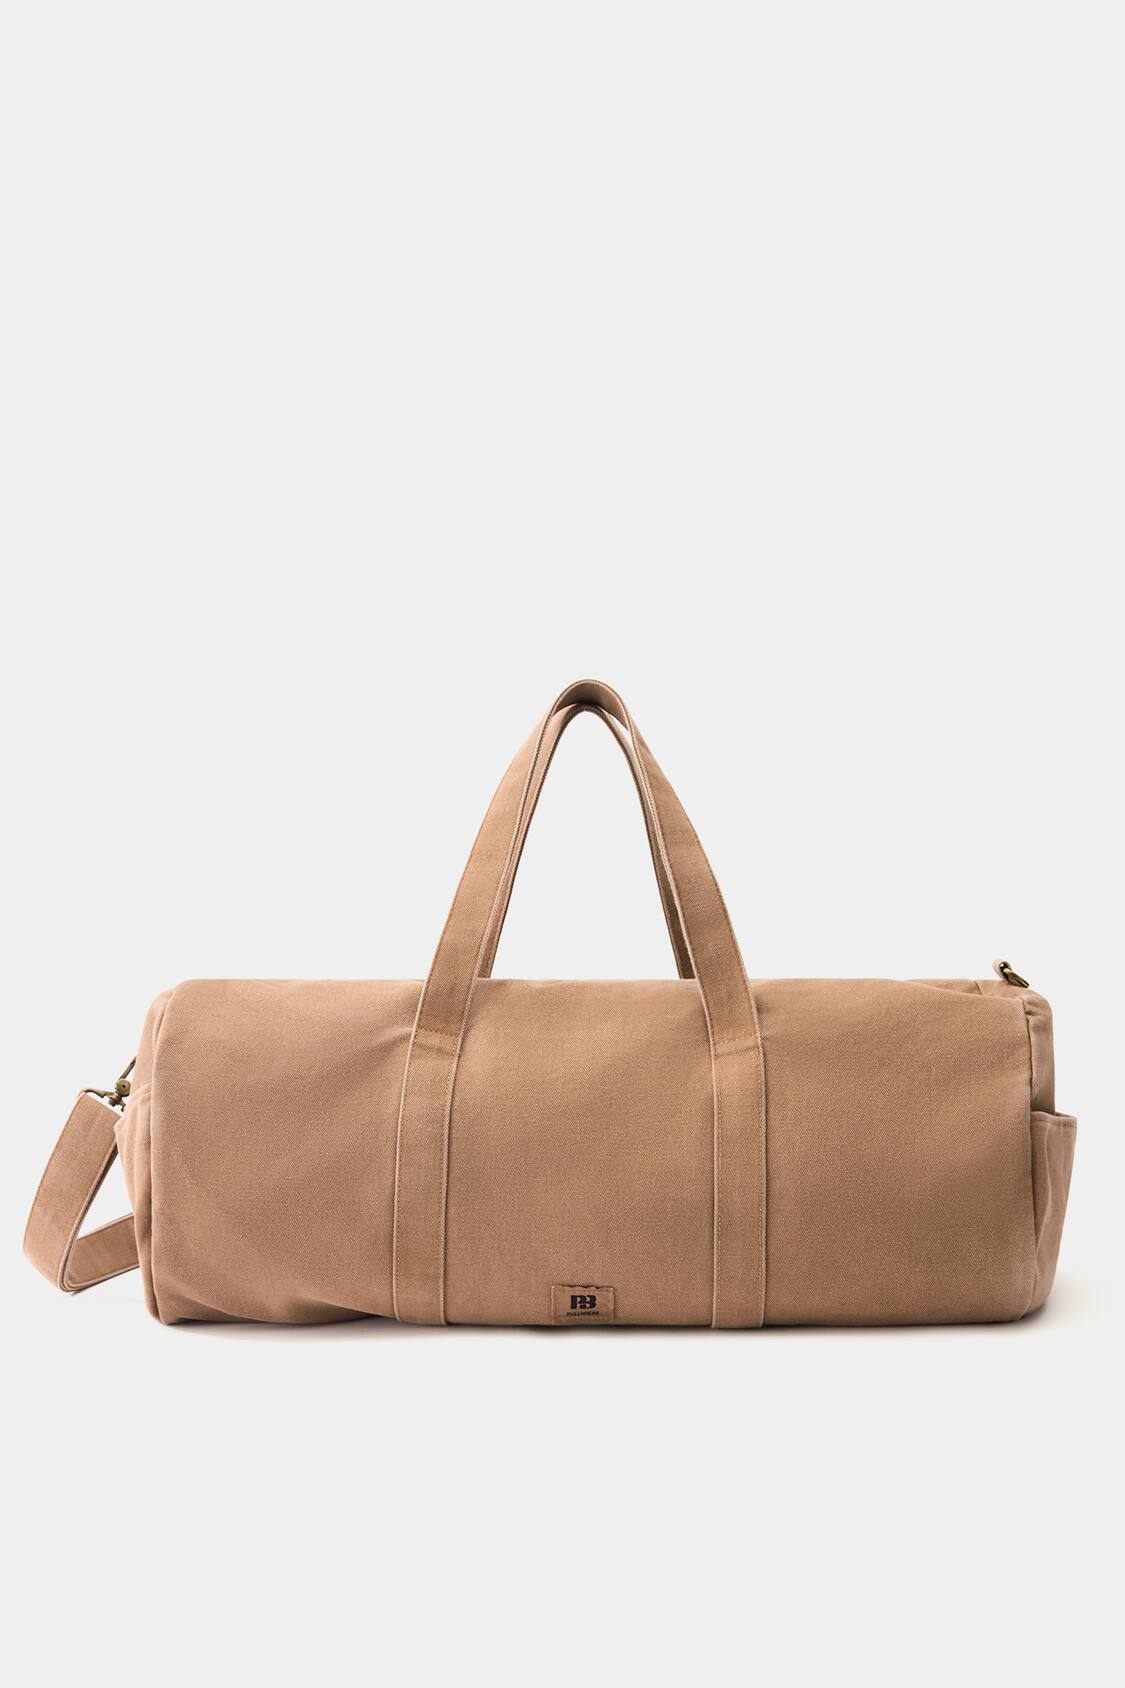 Mobile phone bag with pocket - pull&bear